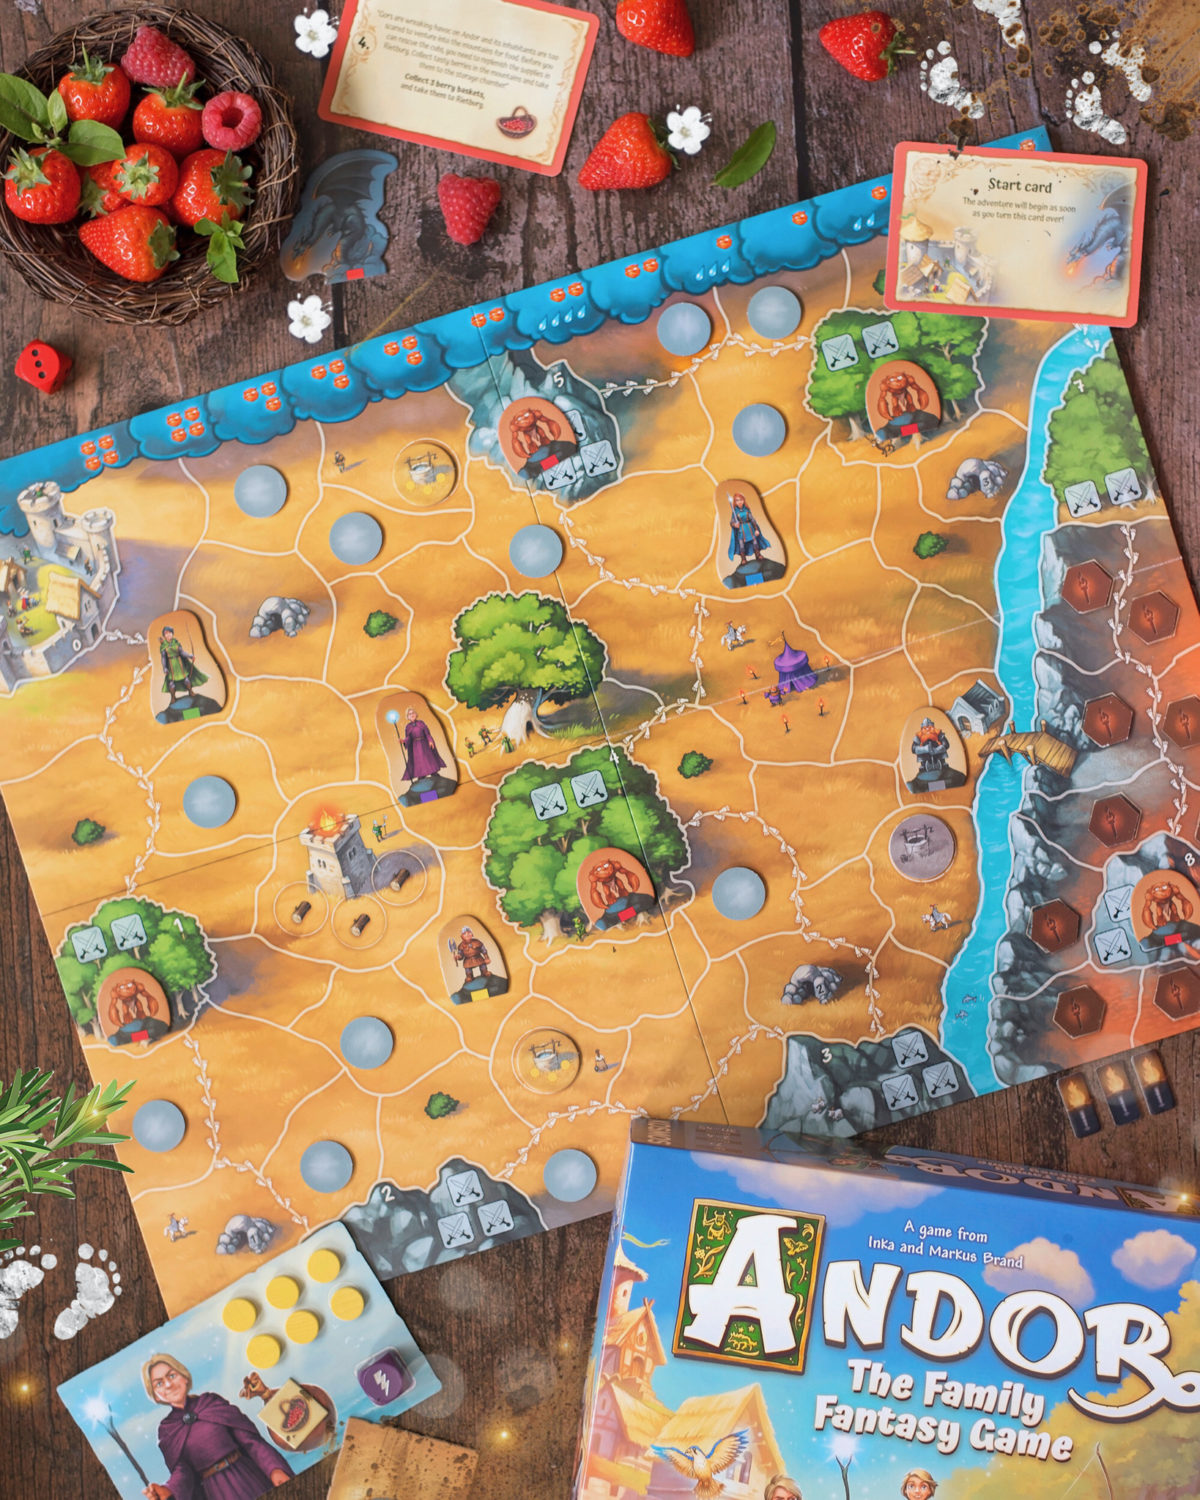 Image shows flat lay of Andor: The Family Fantasy Game board and components from Kosmos Games. Plus some strawberries!